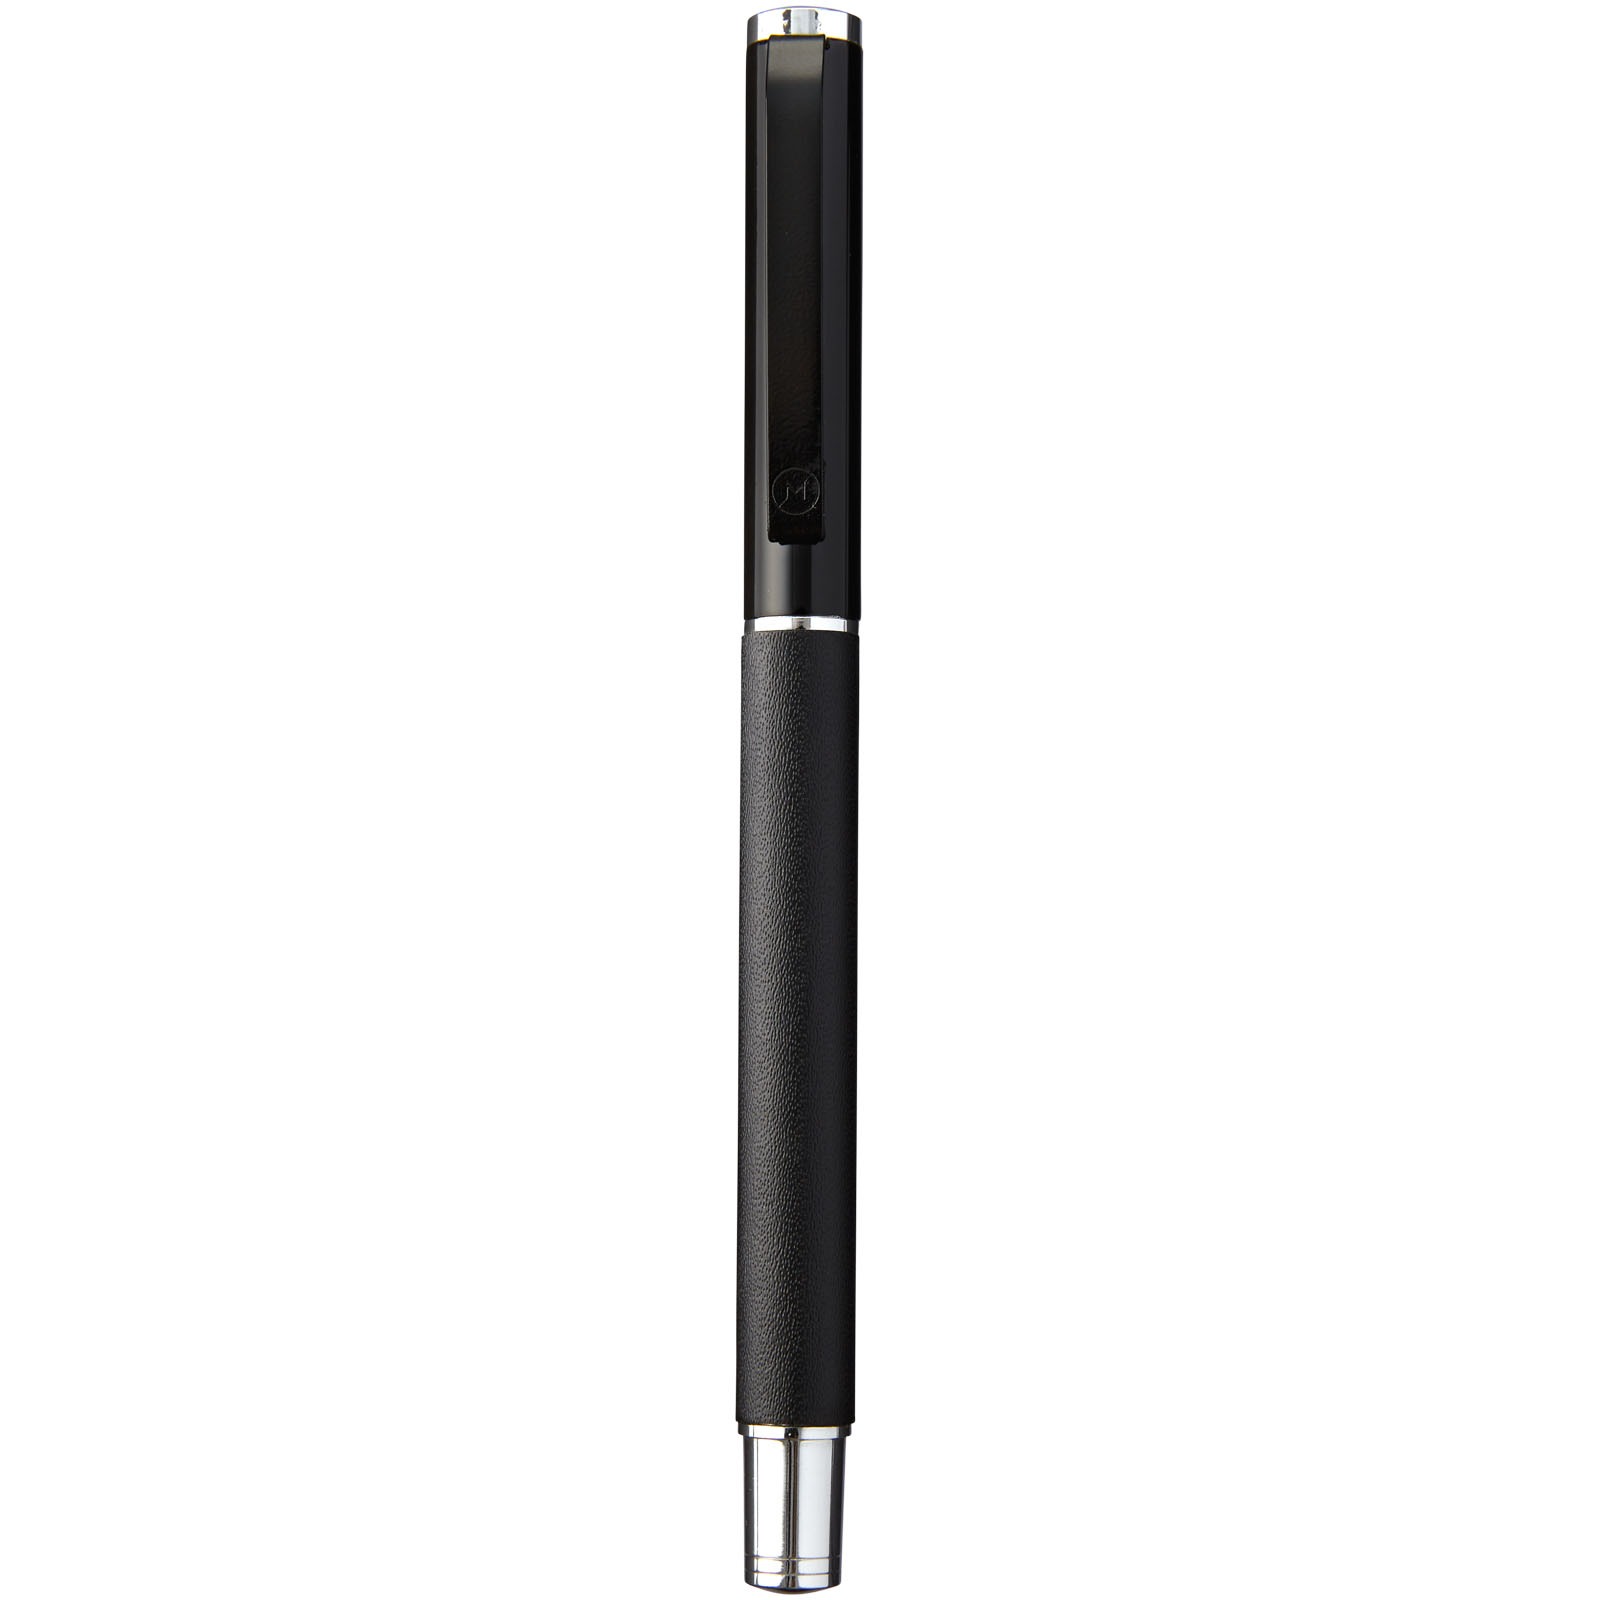 Pedova rollerball pen with leather barrel - JSM Brand Exposure